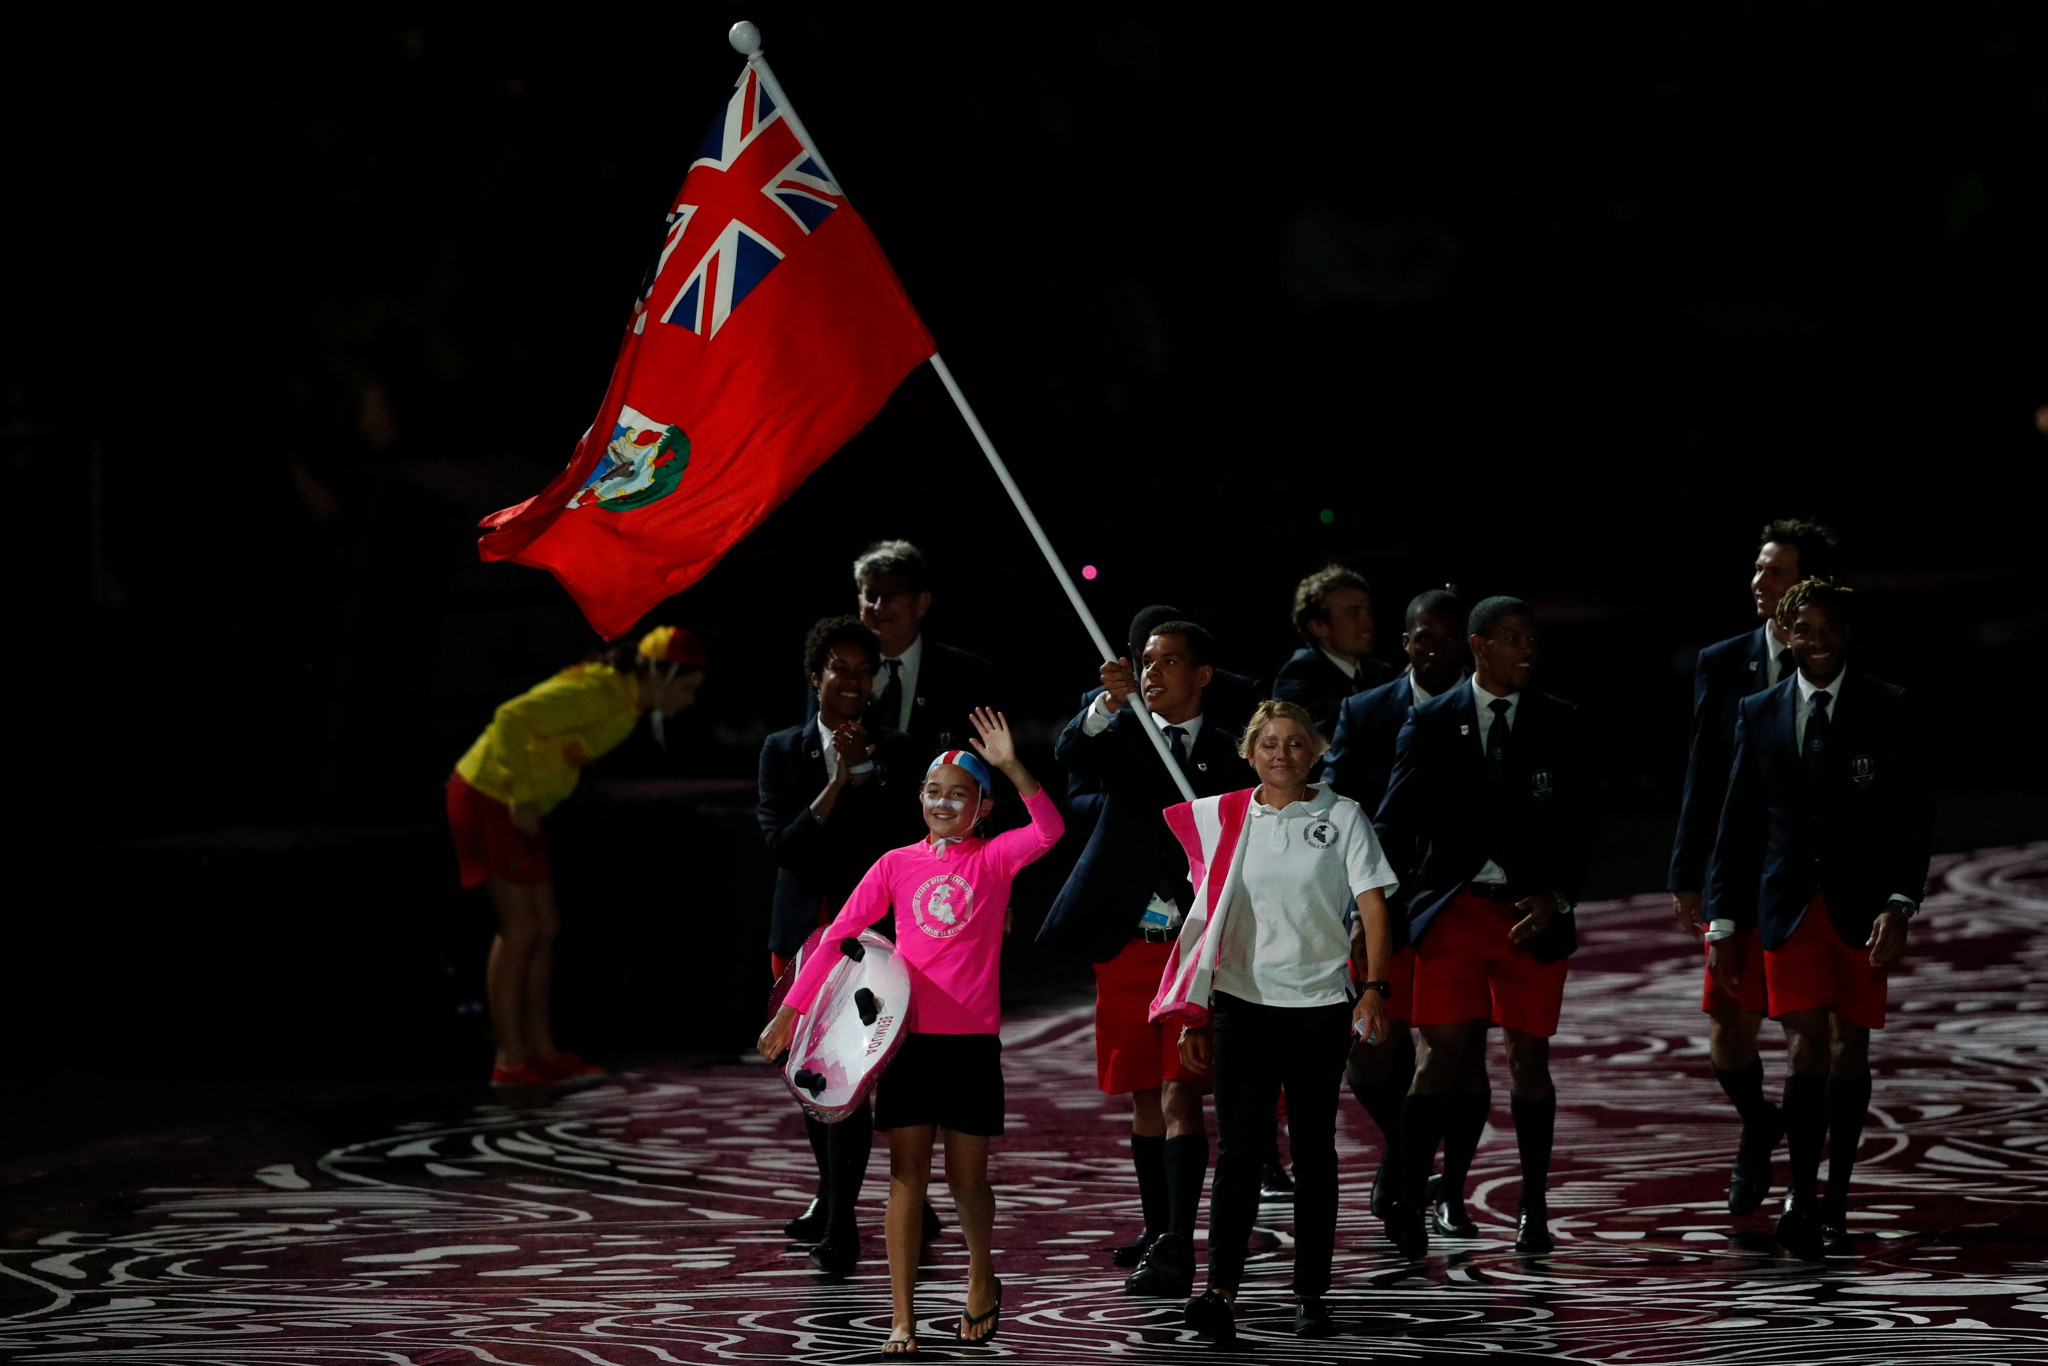 Bermuda famously march in their iconic shorts at major events ©Getty Images